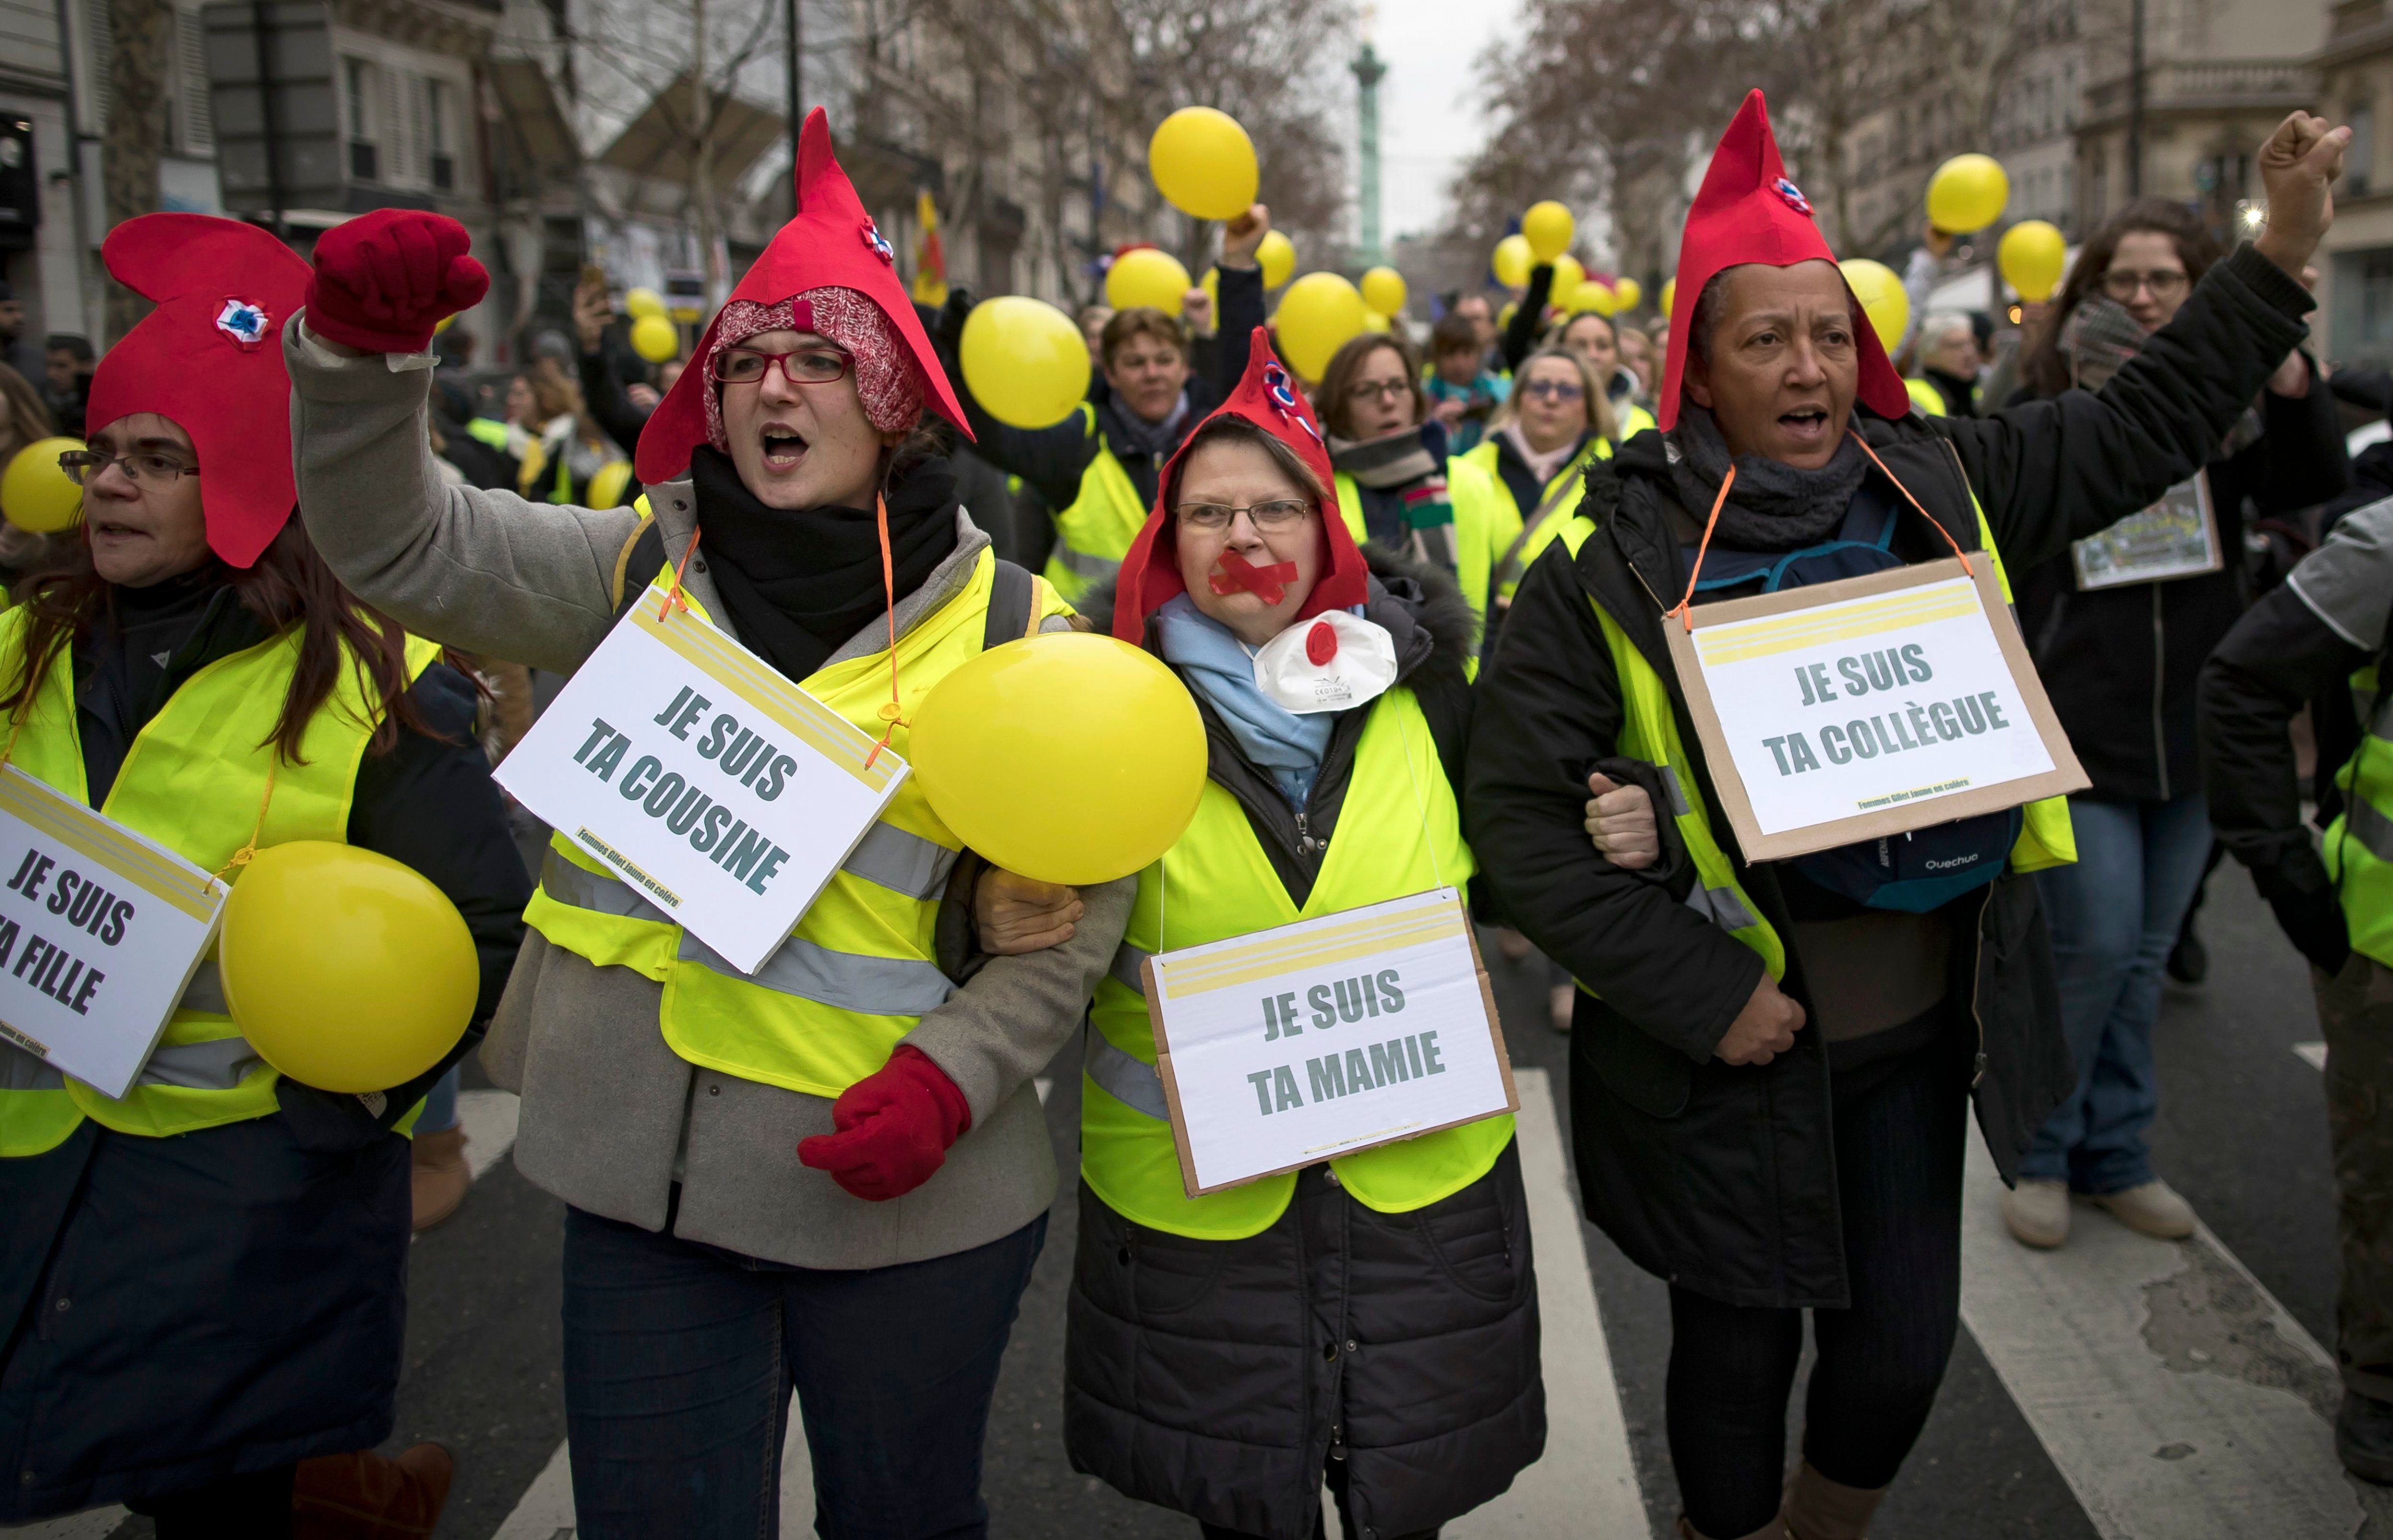 Protesters, wearing French revolutionnary Phrygian caps, take part in a protest march during a women's 'Gilets Jaune' (Yellow Vests) between Place de la Bastille and Republique, in Paris, France, on Jan. 6, 2018. (IAN LANGSDON—EPA-EFE/REX/Shutterstock)